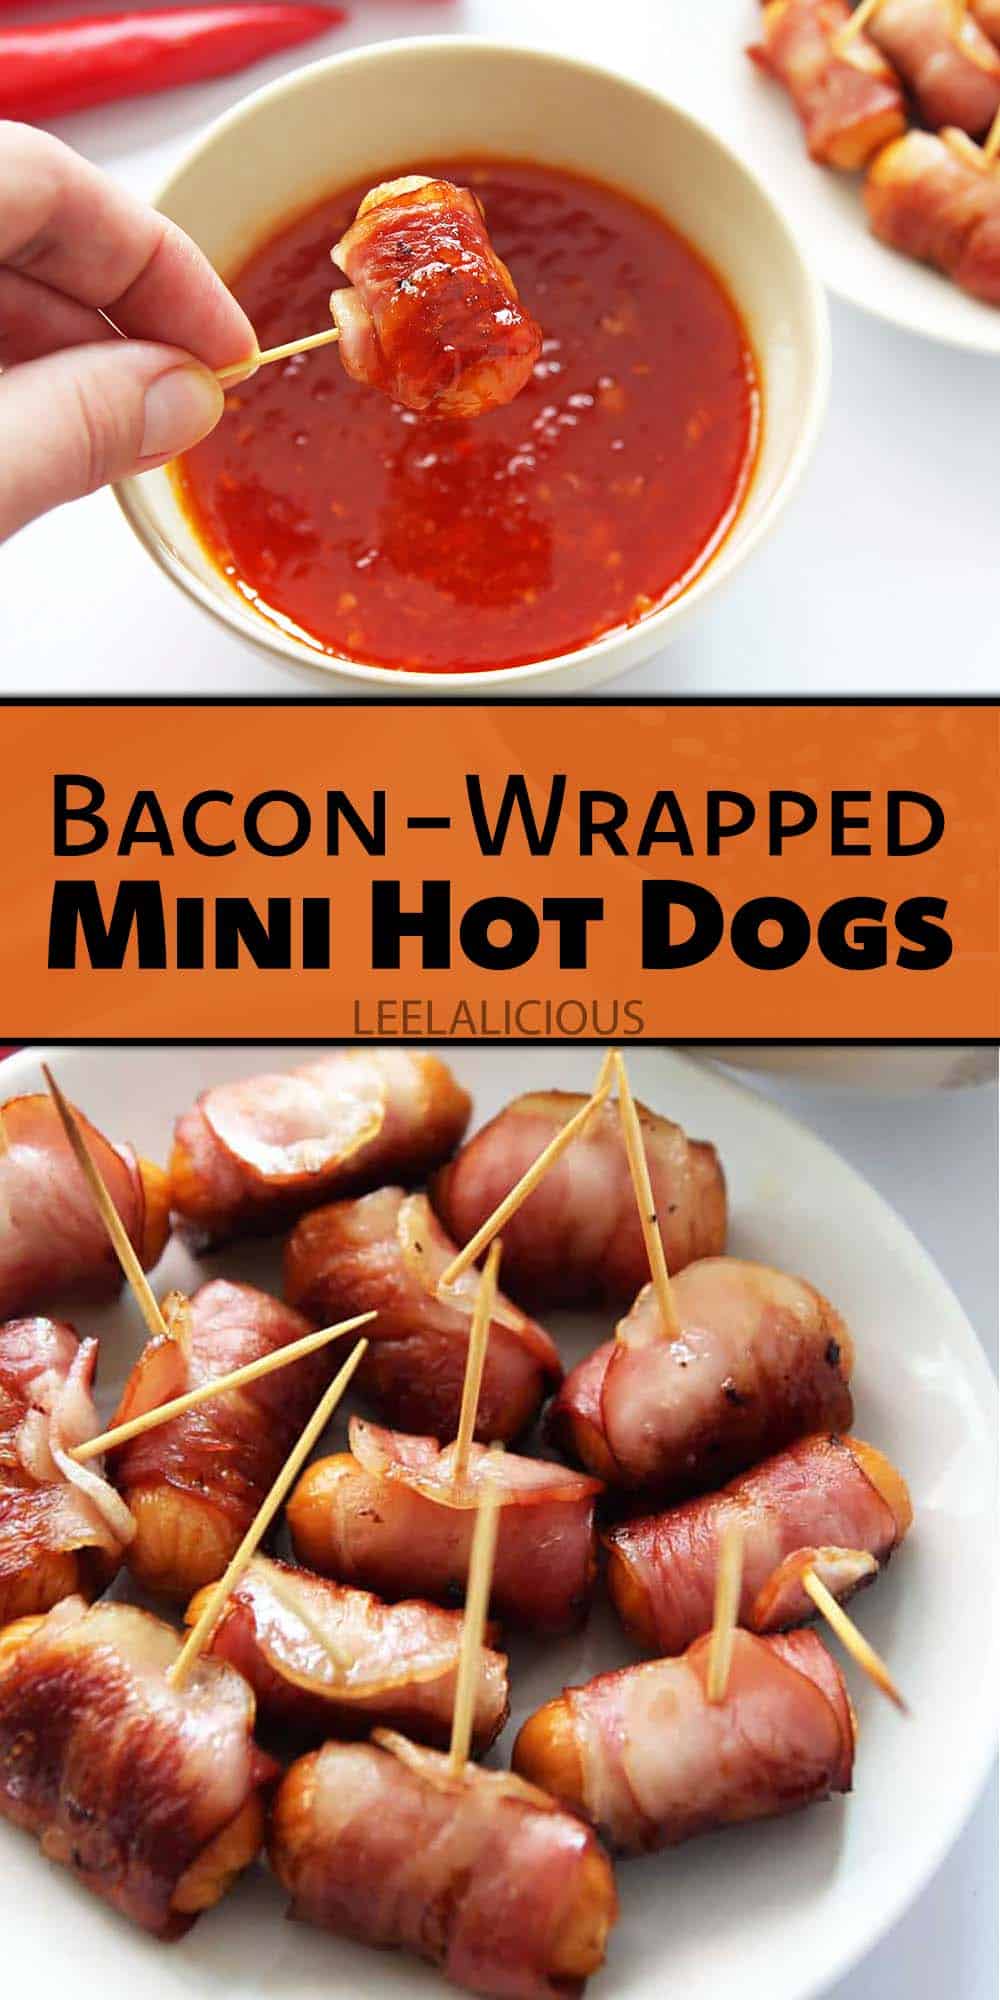 Bacon-Wrapped Mini Hot Dogs